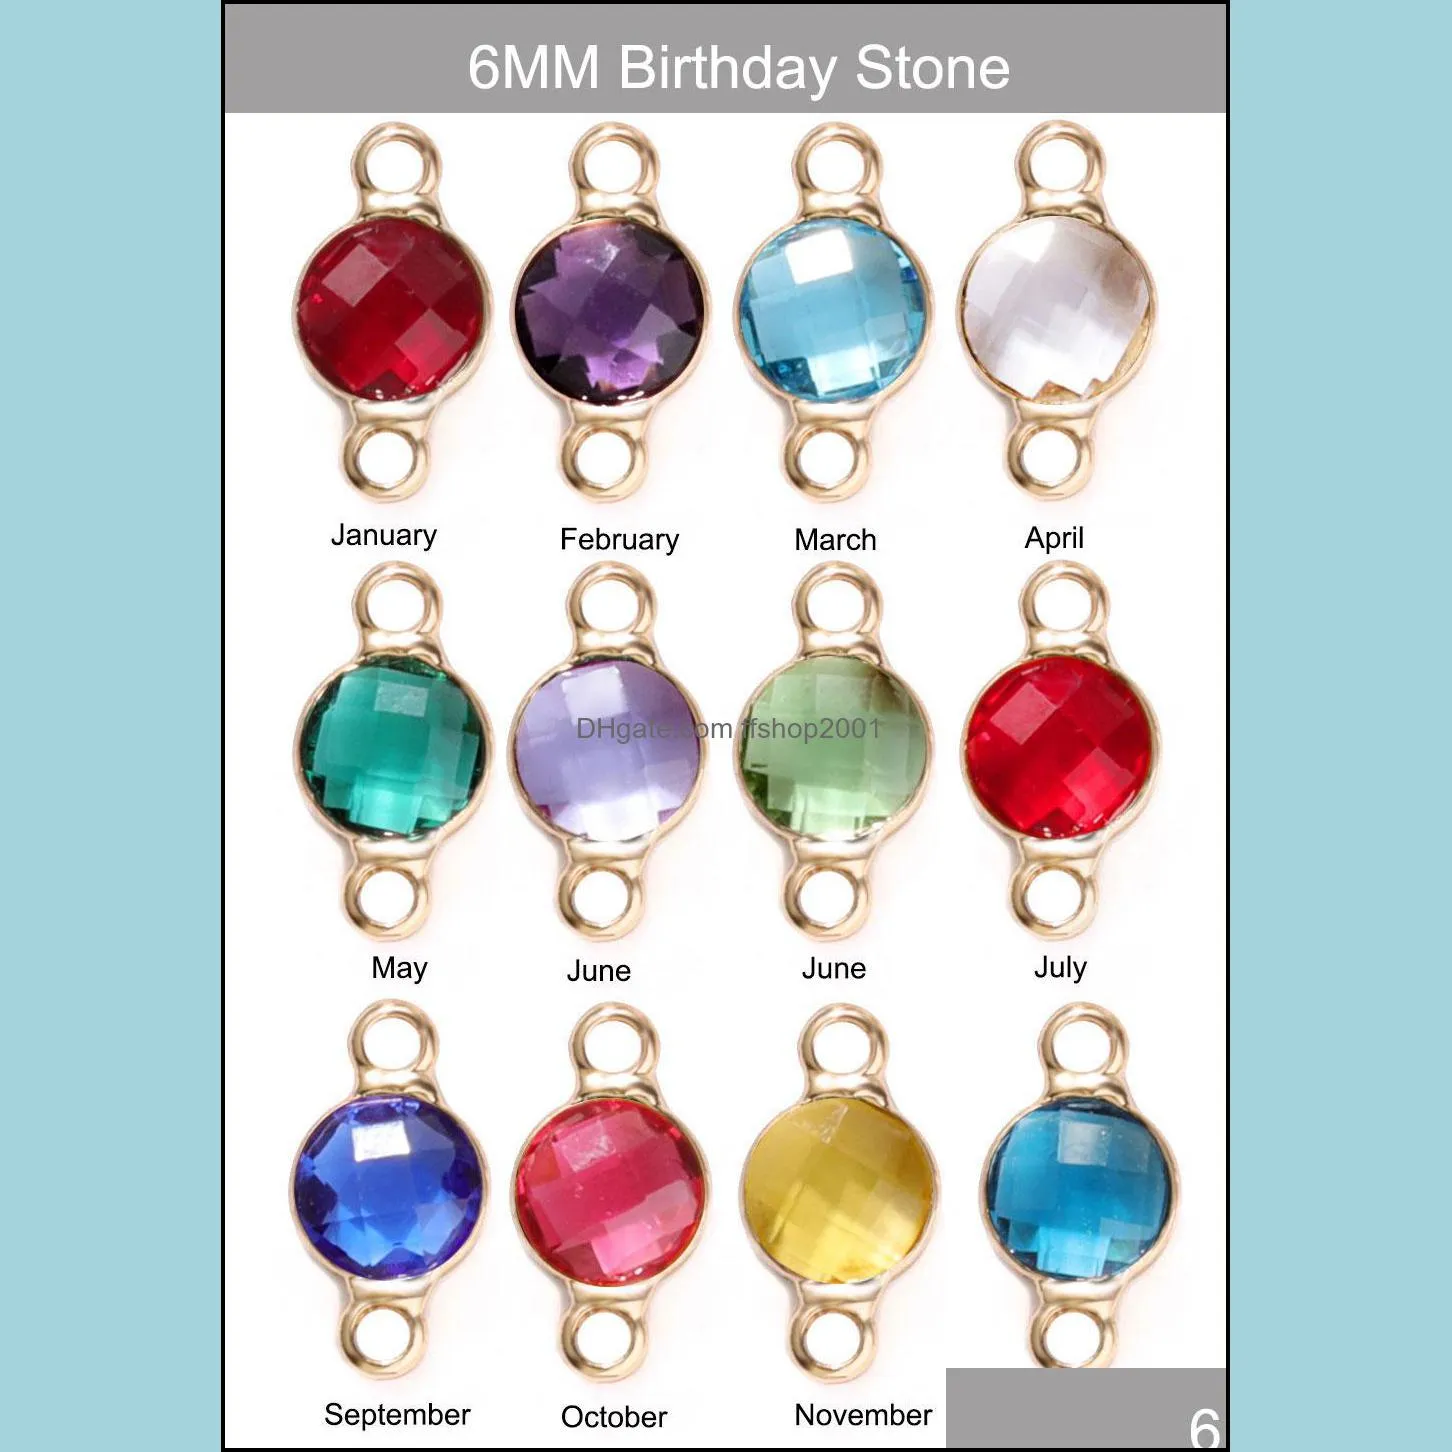 wholesale fashion 6mm birthstone crystal glass pendant charms for bracelet bangle earrings gold edge 12 months colorful diy jewelry charm